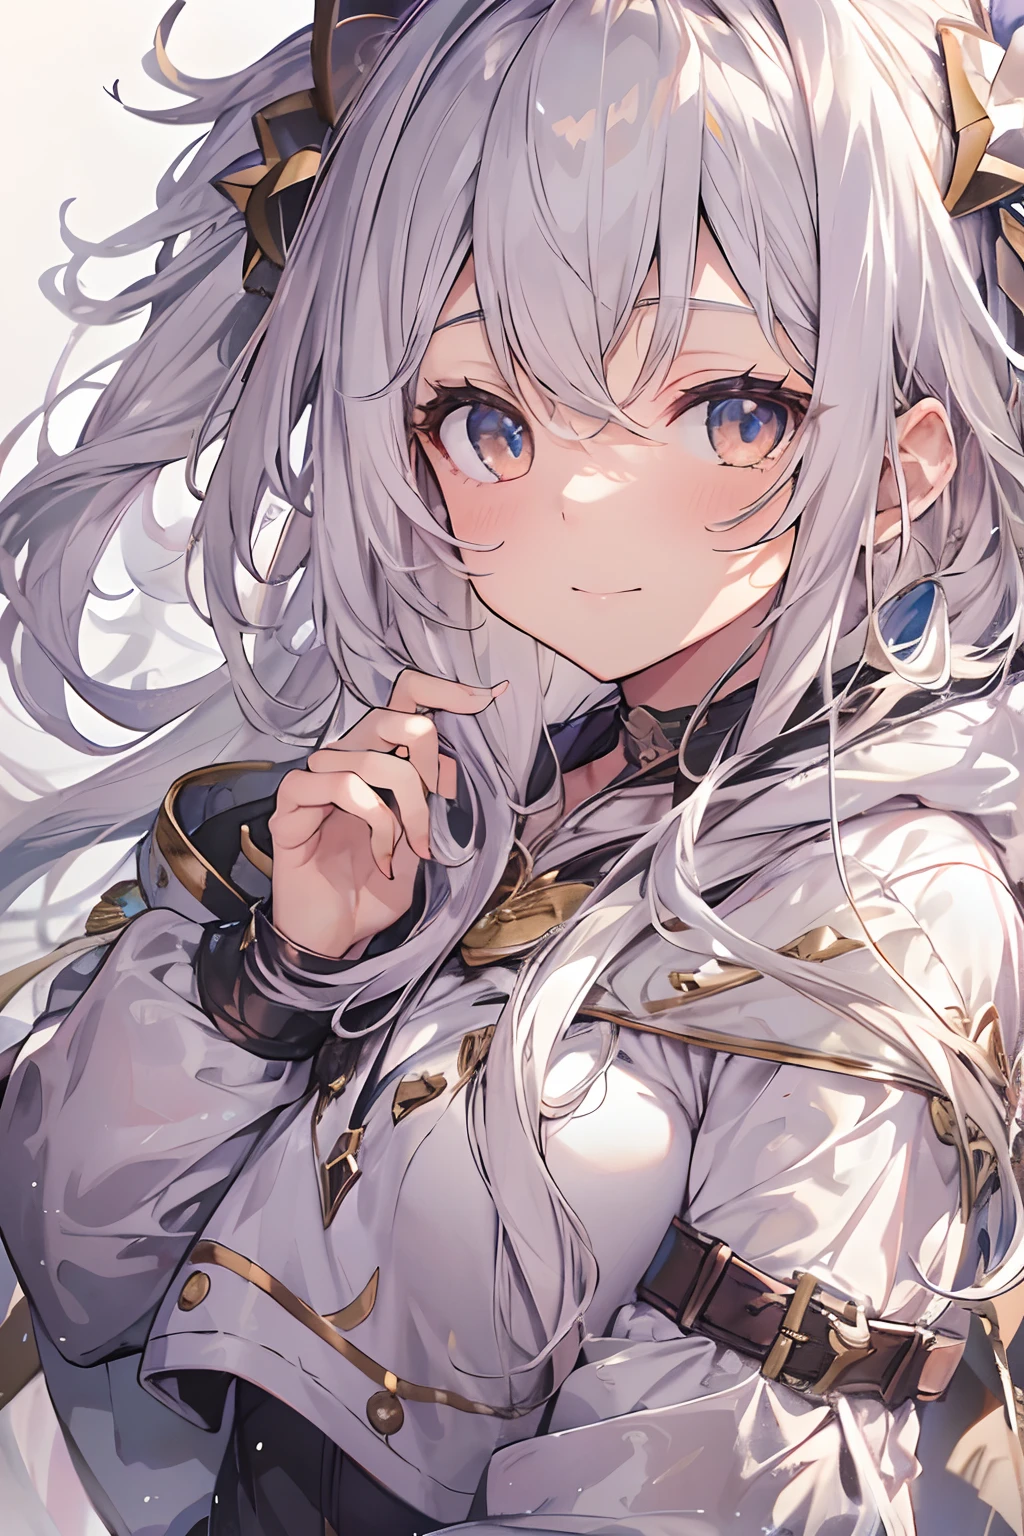 top-quality、8K))One Woman　long hair anime girl、extremely cute anime girl face、nightcore、From the front line of girls、Portrait of a cute anime girl、granblue fantasy style, granblue fantasy style, granblue fantasy style, Whole body, from bellow,ceiling,Looking at Viewer, Head_tilt, , girl,Woman,Female, Mature,30 years old, Very long hair, flipped hair, White and silver hair, Flowing hair, Ahoge, lightsmile, beautiful and delicate golden eyes, Medium_breasts, thighs thighs thighs thighs, White skin, coat, Hoodie, Black_Skirt, knee_long boots, hoods_Down, Thigh_the gap, Black clothes, Transparent_Background, Transparent_Background, Transparent_Background, absurderes, hight resolution, very precise details,fullllbody　Night mood